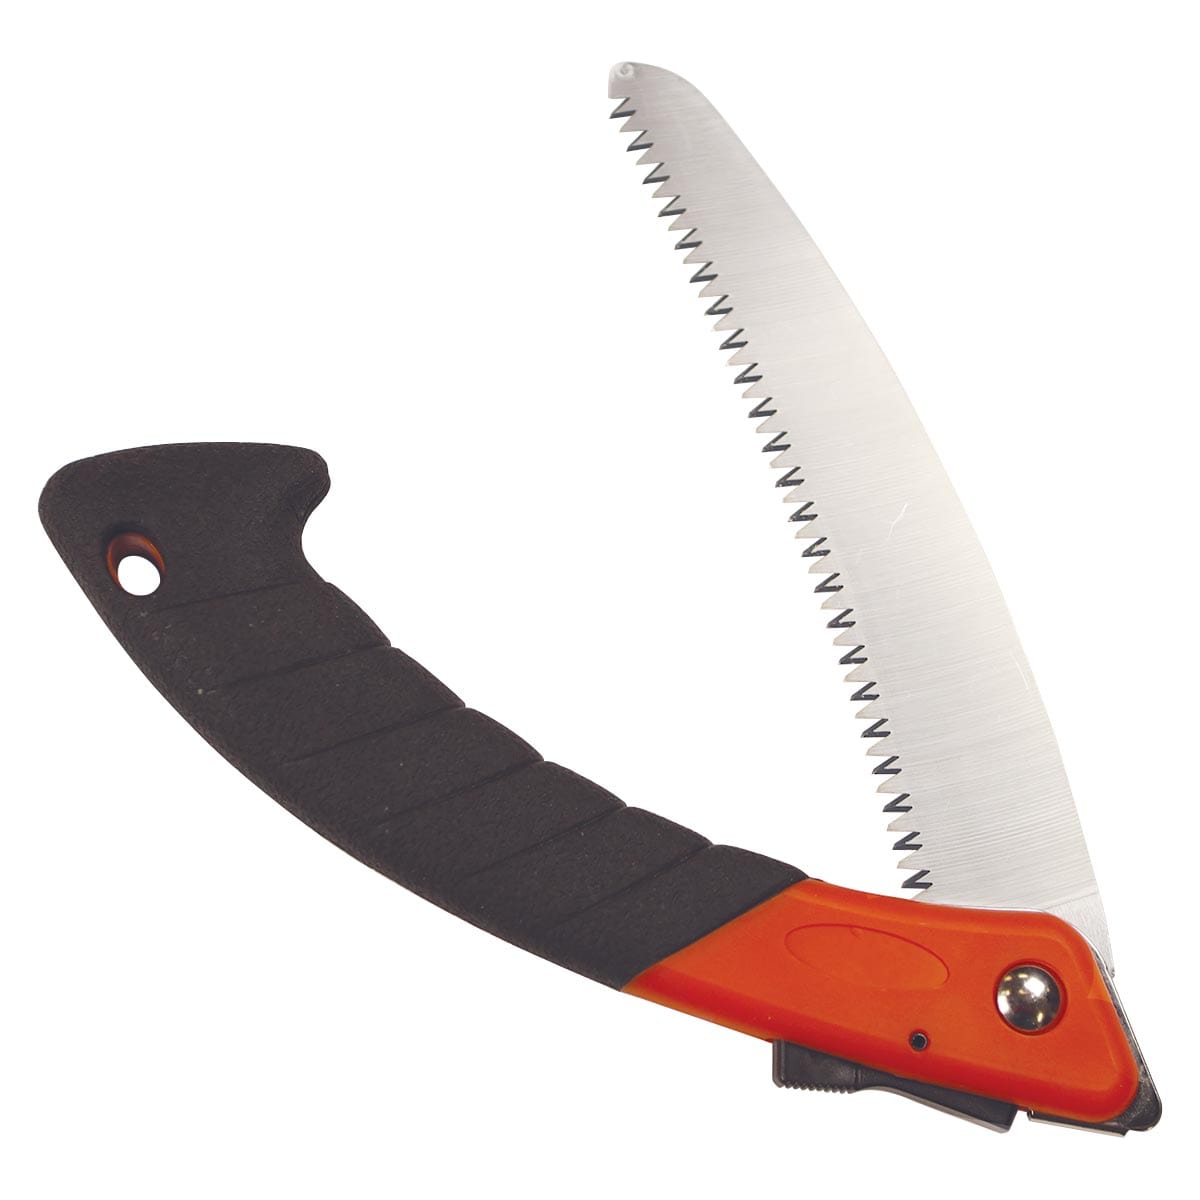 Gemplers Professional Folding Pruning Saw with 7” Blade